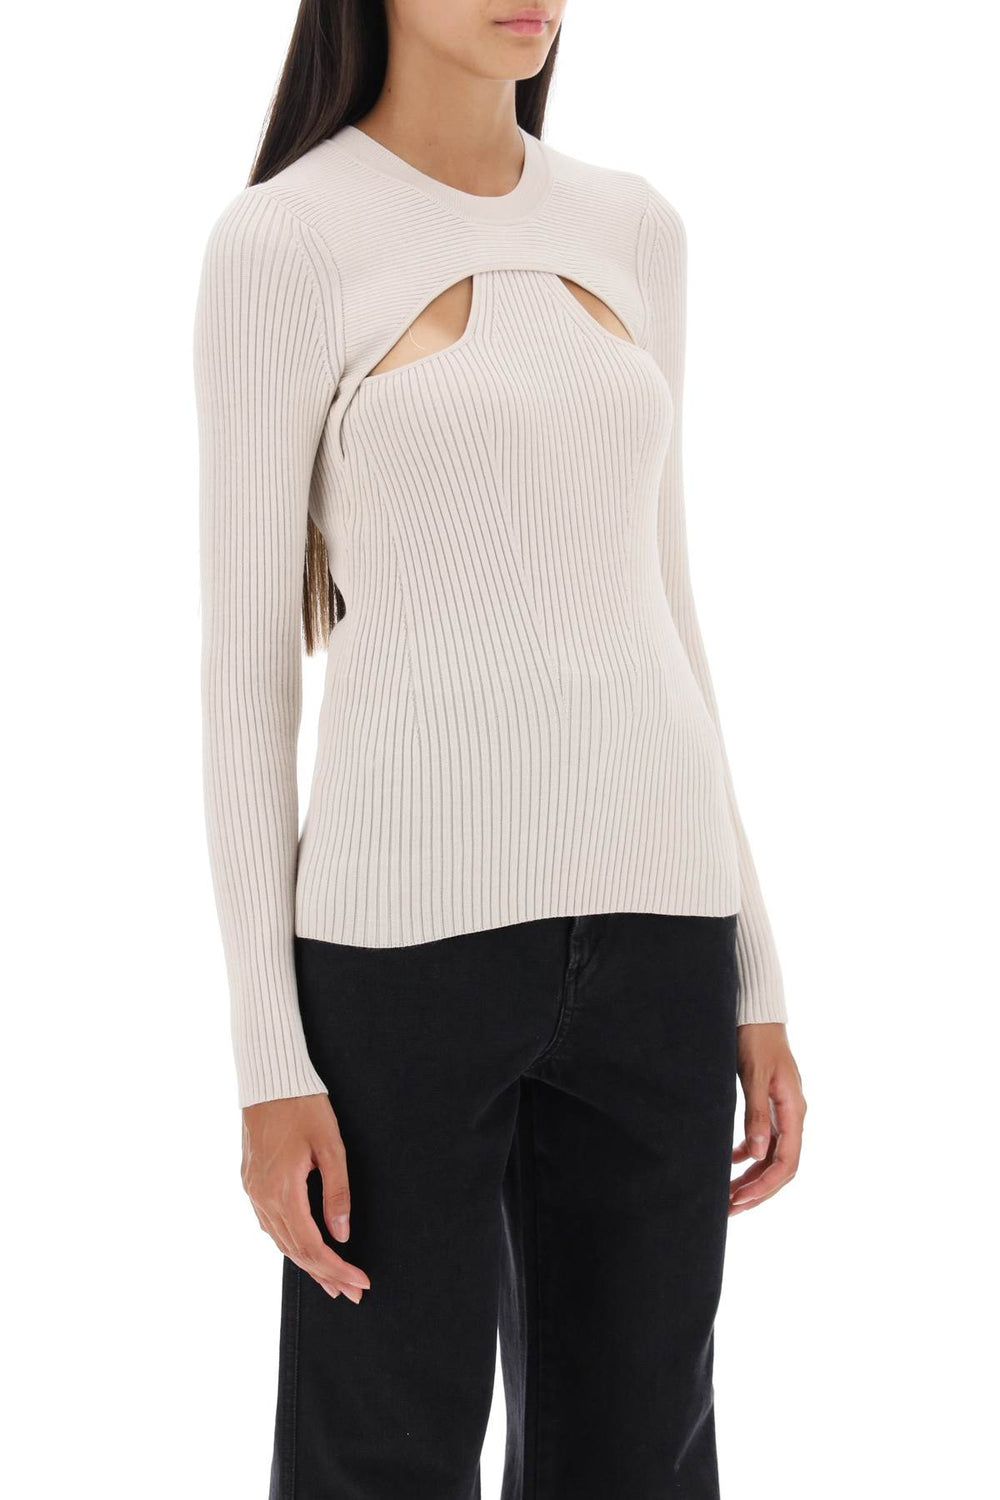 Isabel marant 'zana' cut-out sweater in ribbed knit-1